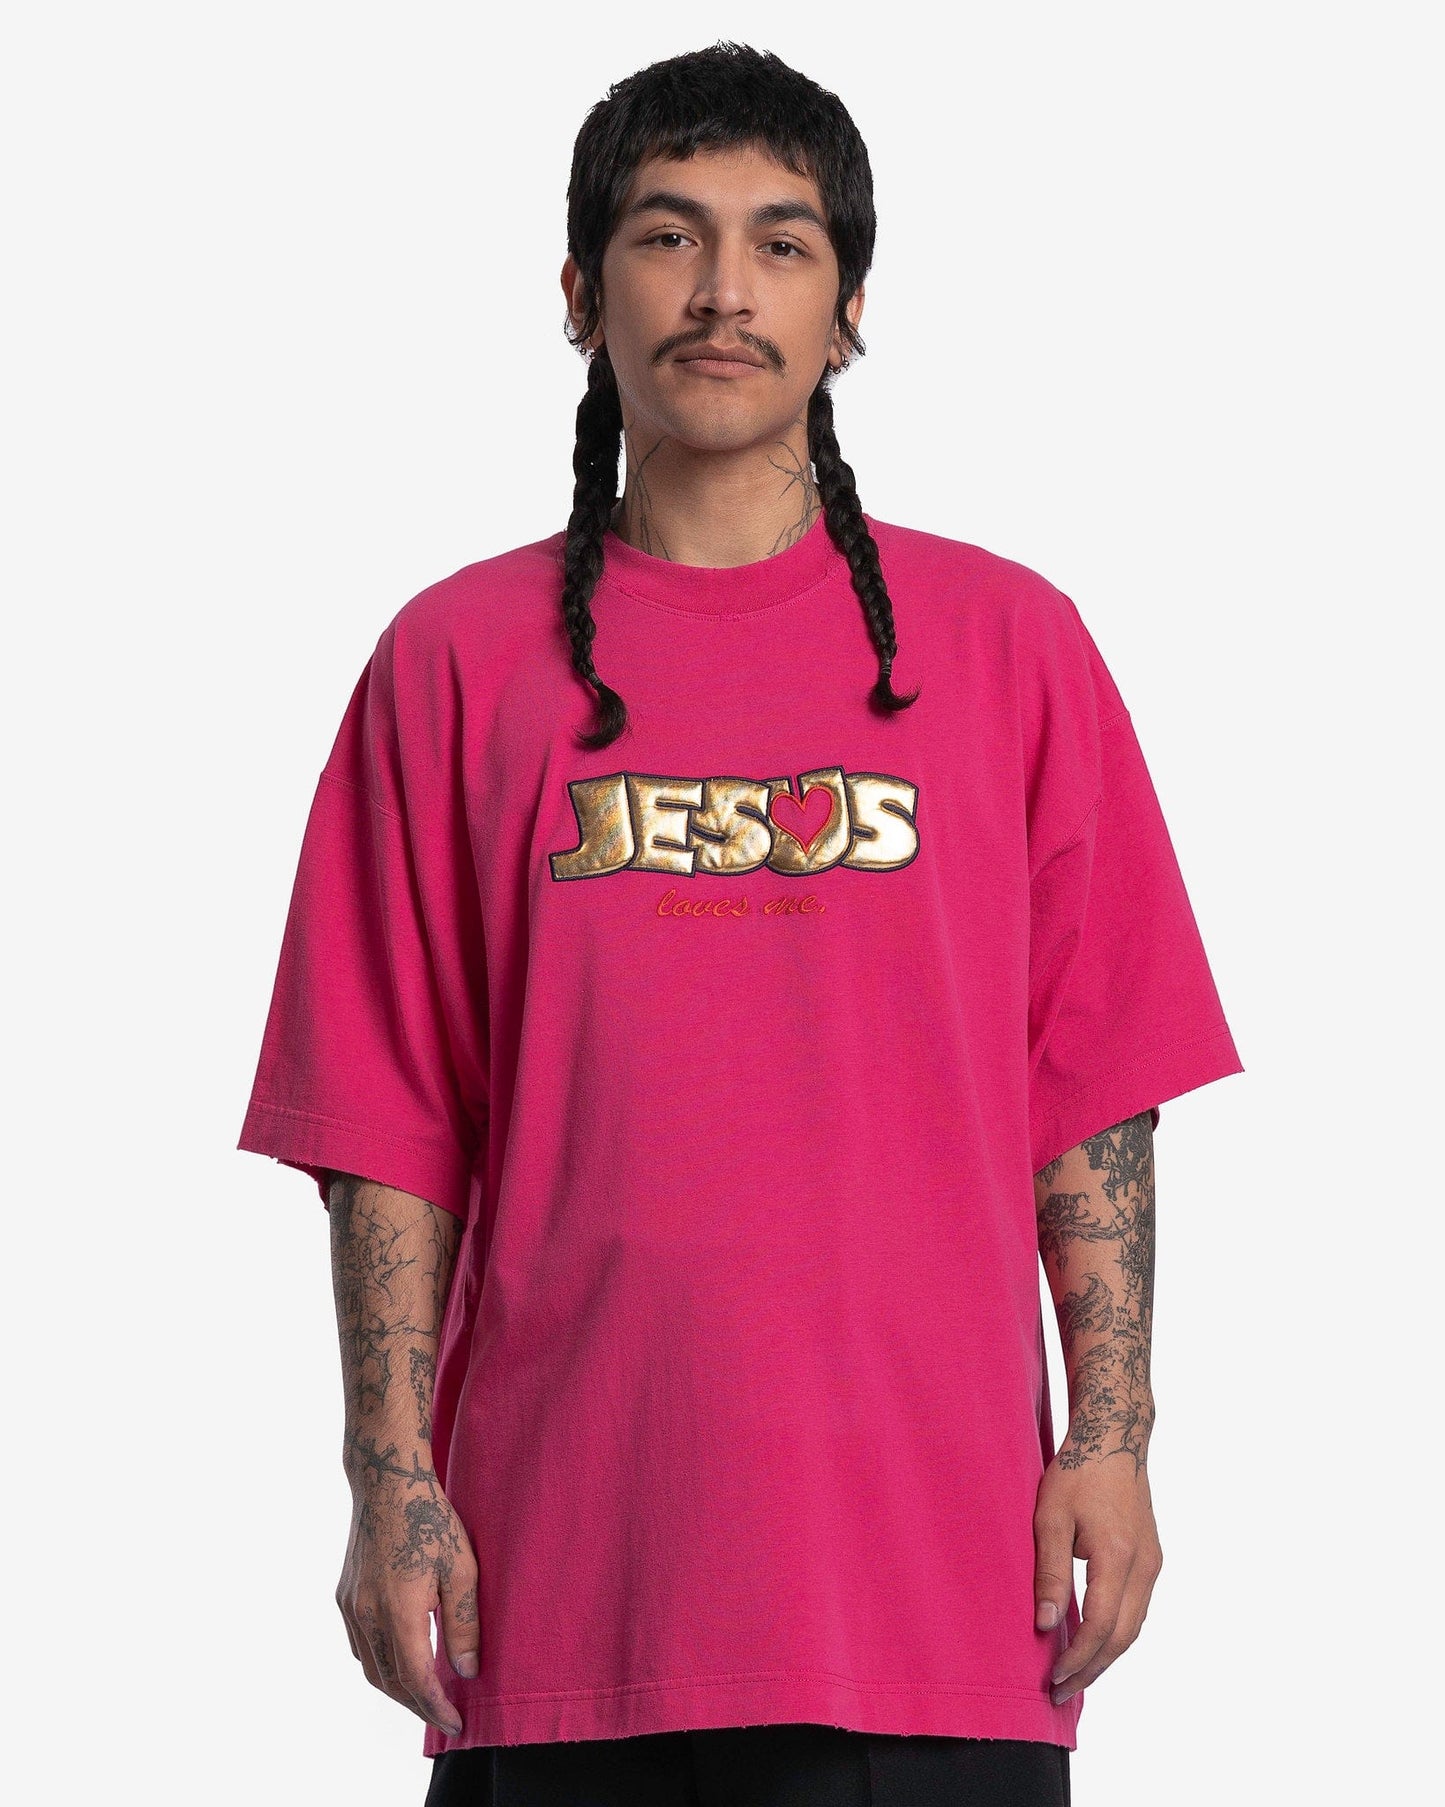 VETEMENTS Men's T-Shirts Jesus Loves You T-Shirt in Faded Hot Pink